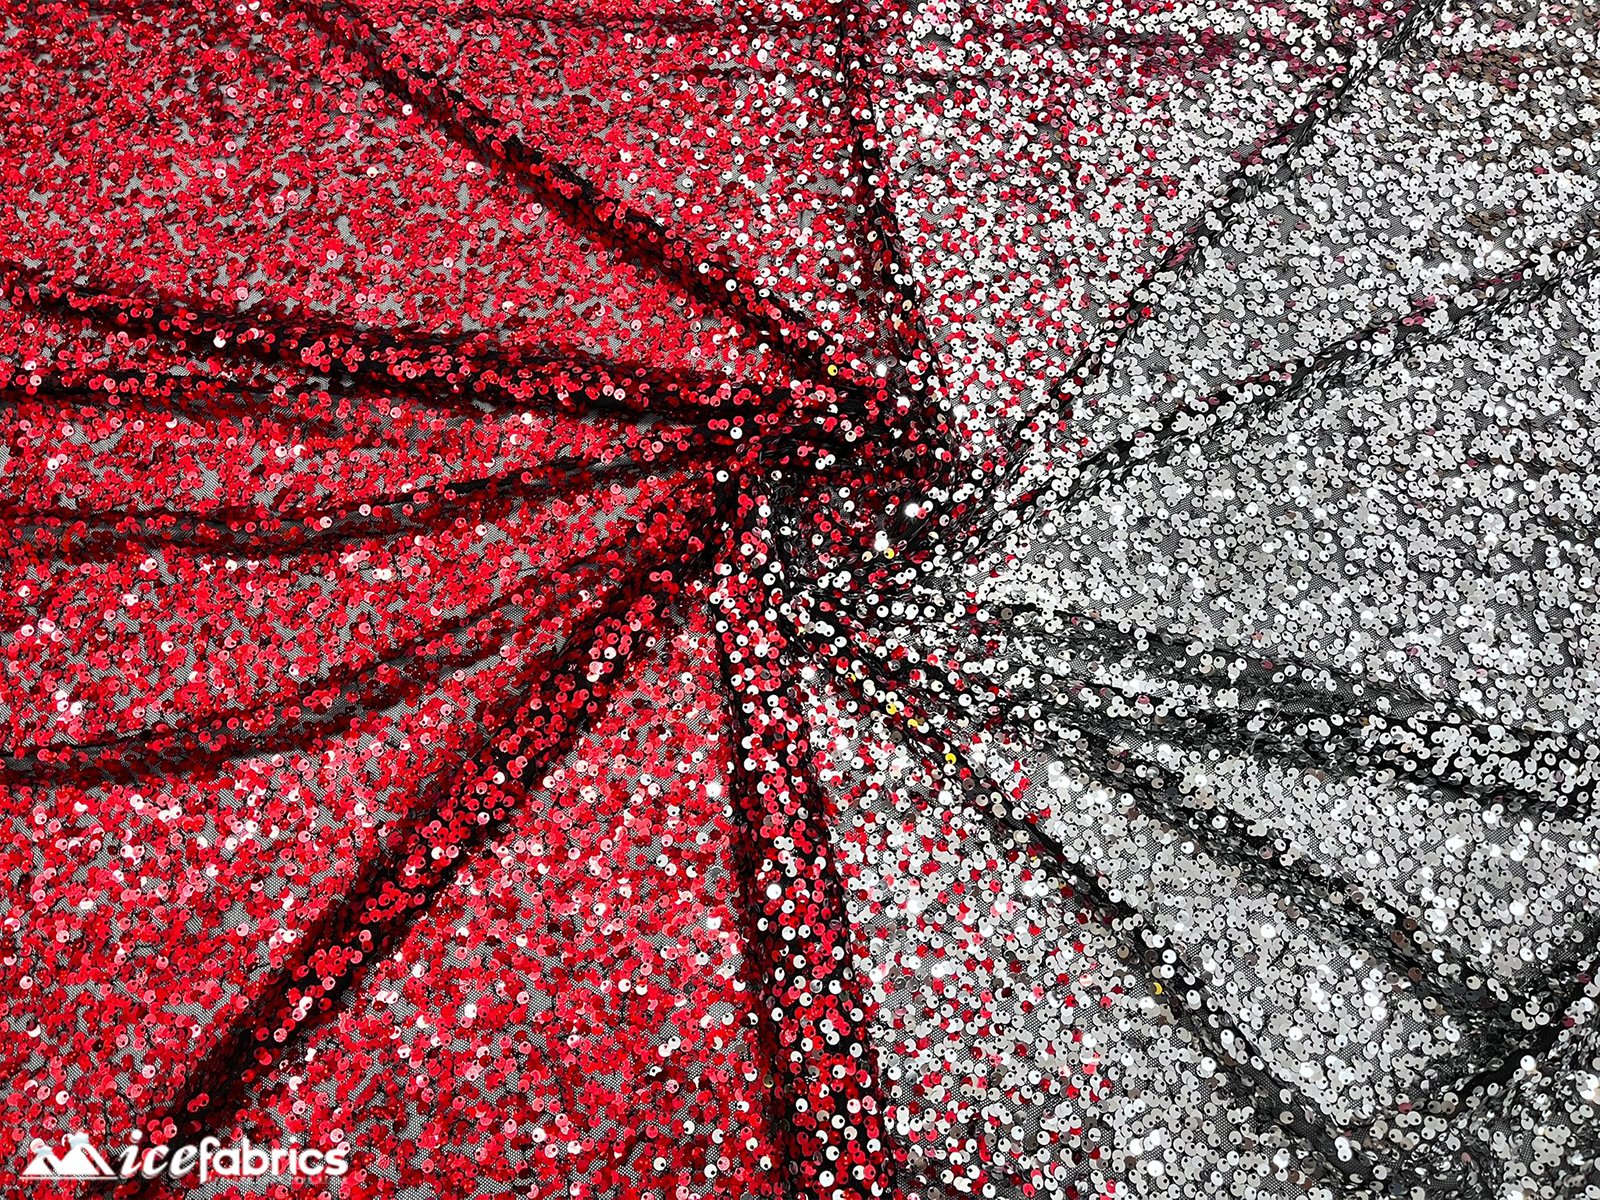 Iridescent Red Silver 3 Tone 4 Way Stretch Sequin Fabric on Black Mesh LaceICE FABRICSICE FABRICSBy The Yard (58" Wide)Iridescent Red Silver 3 Tone 4 Way Stretch Sequin Fabric on Black Mesh Lace ICE FABRICS